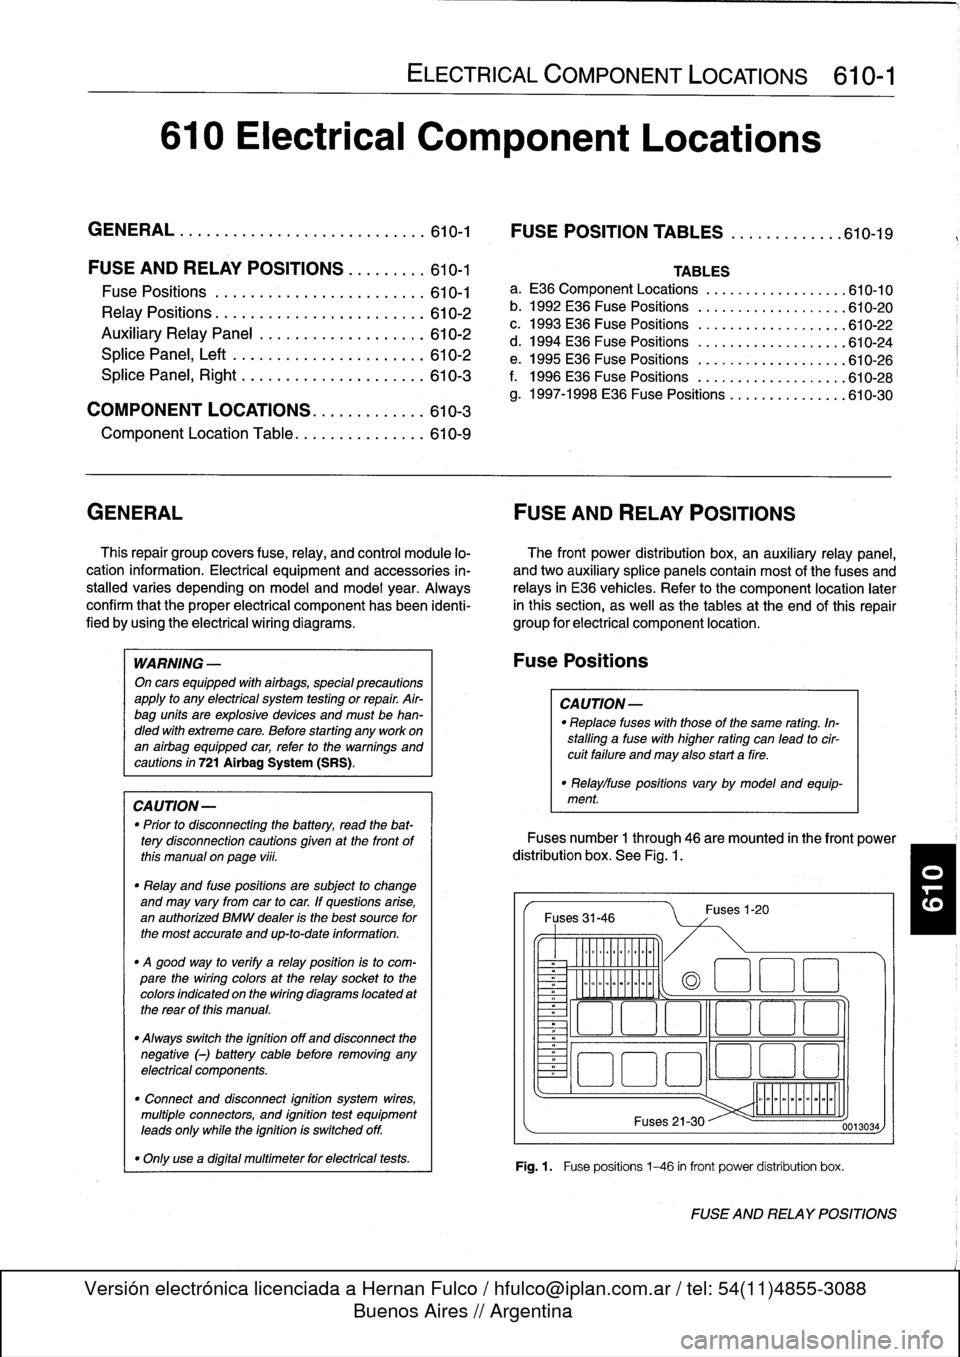 BMW 328i 1994 E36 Workshop Manual 
610
Electrical
Component
Locations

GENERAL
...........
.
.
.
.
.
.
.
.
.
........
610-1

	

FOSE
POSITION
TABLES
..
.
.
.
.
.
.....
.
610-19

FUSE
AND
RELAY
POSITIONS
.
...
.
.
.
.
.
610-1

Fuse
Pos